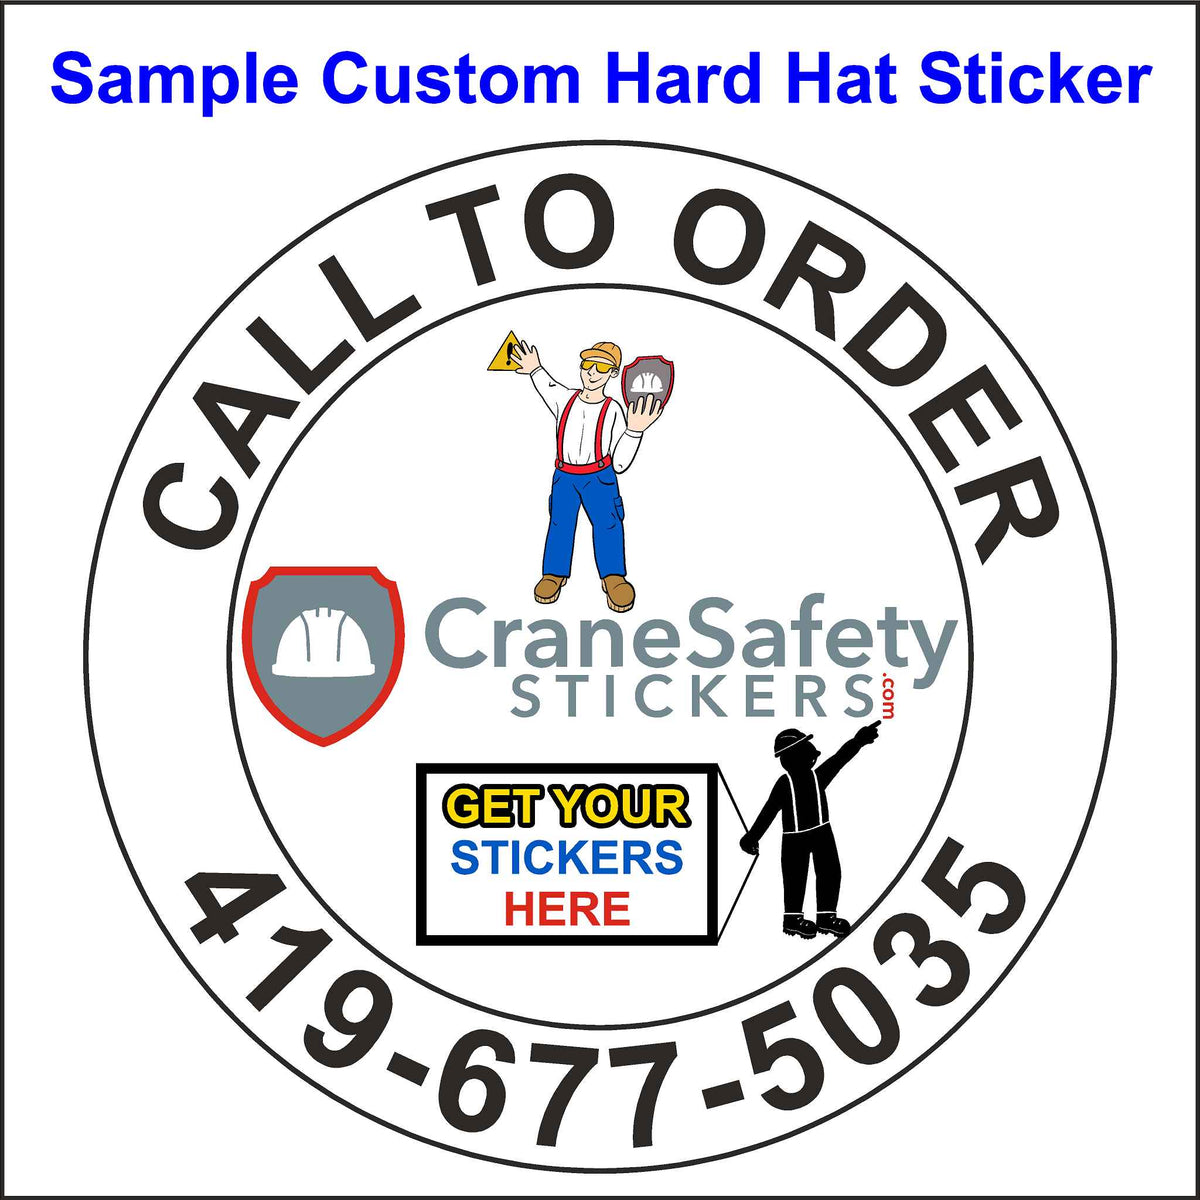 Custom Sticker For Hard Hats Sample. This Particular one HAs The Company Logo, Phone Number, and Tag Line.